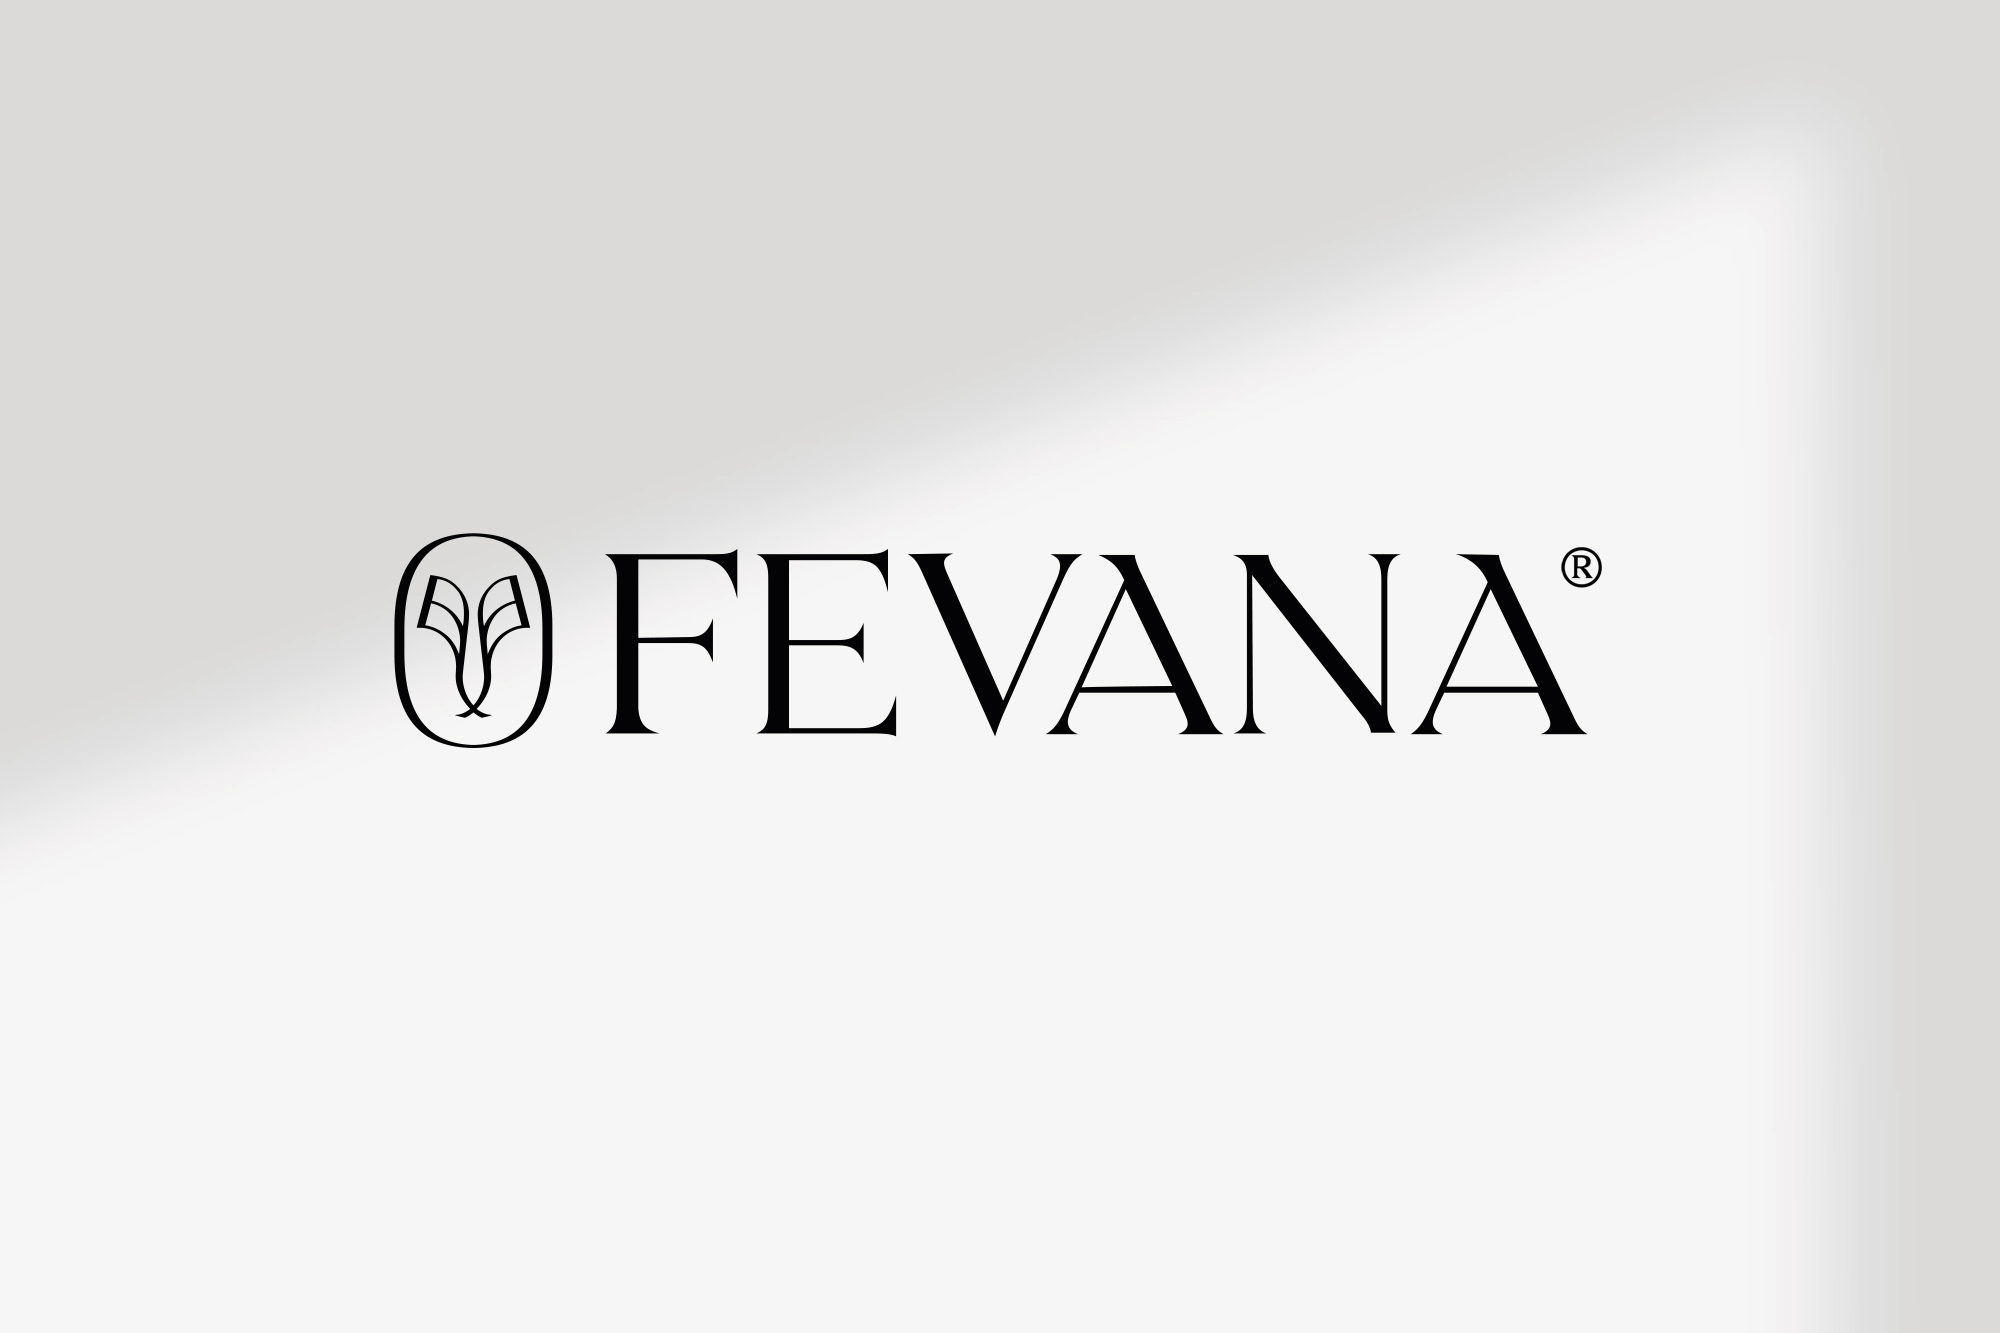 Cyclical Supplementation in a Minimalist Design: Branding and Packaging Design for Fevana by Dominika.studio